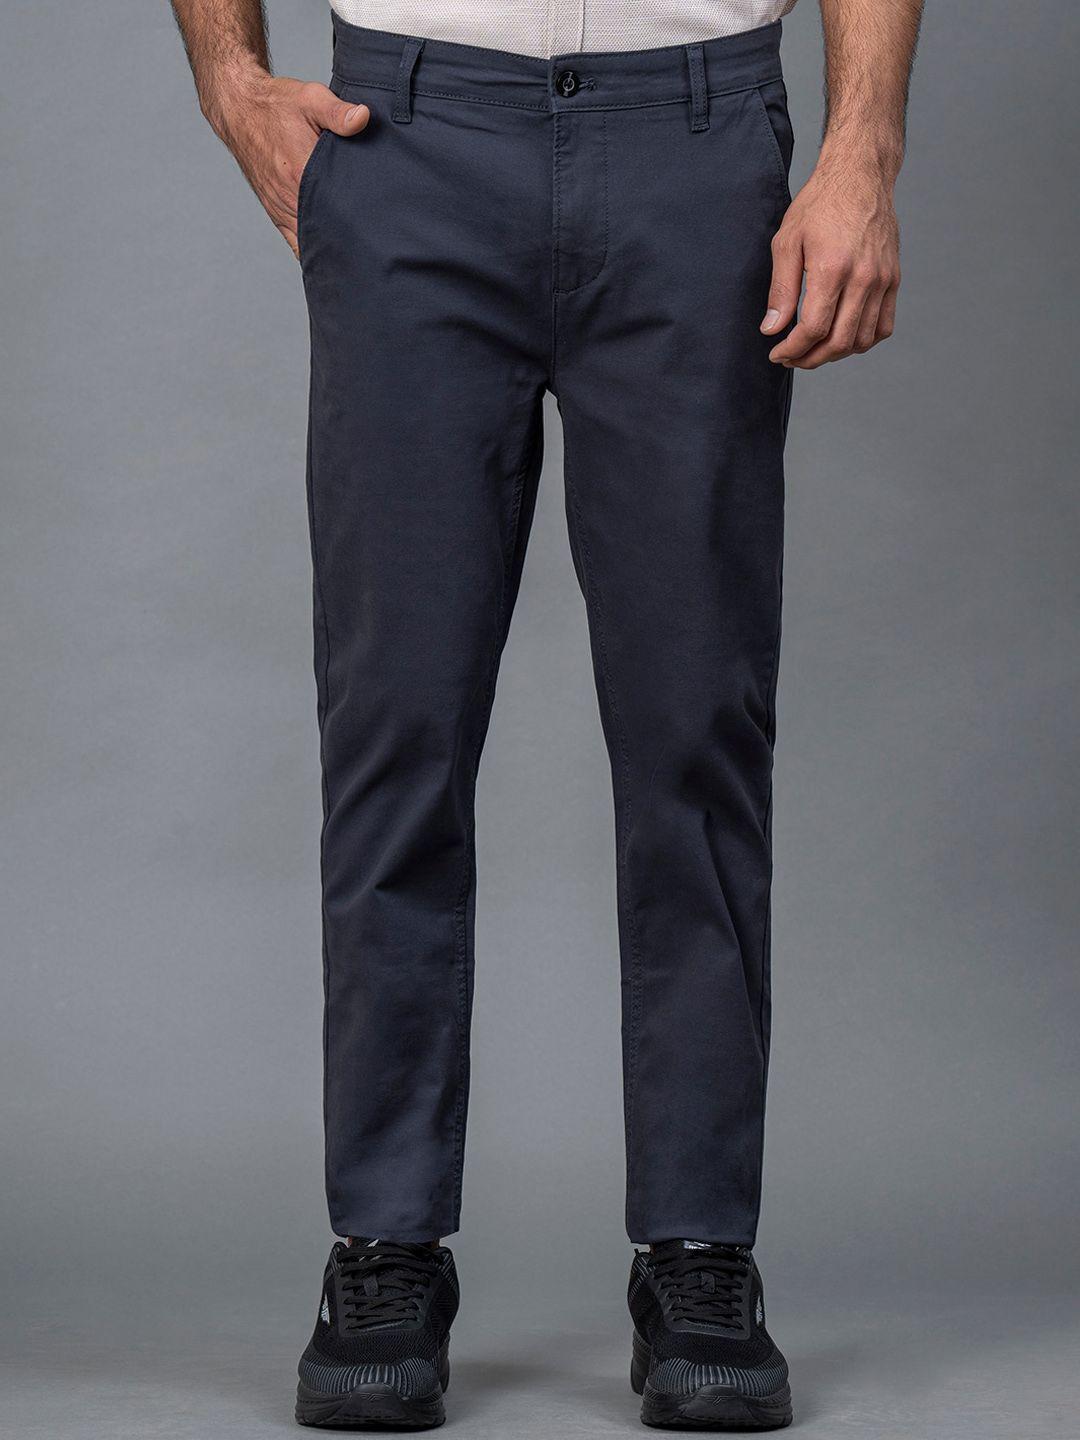 red tape men navy blue skinny fit chinos trousers